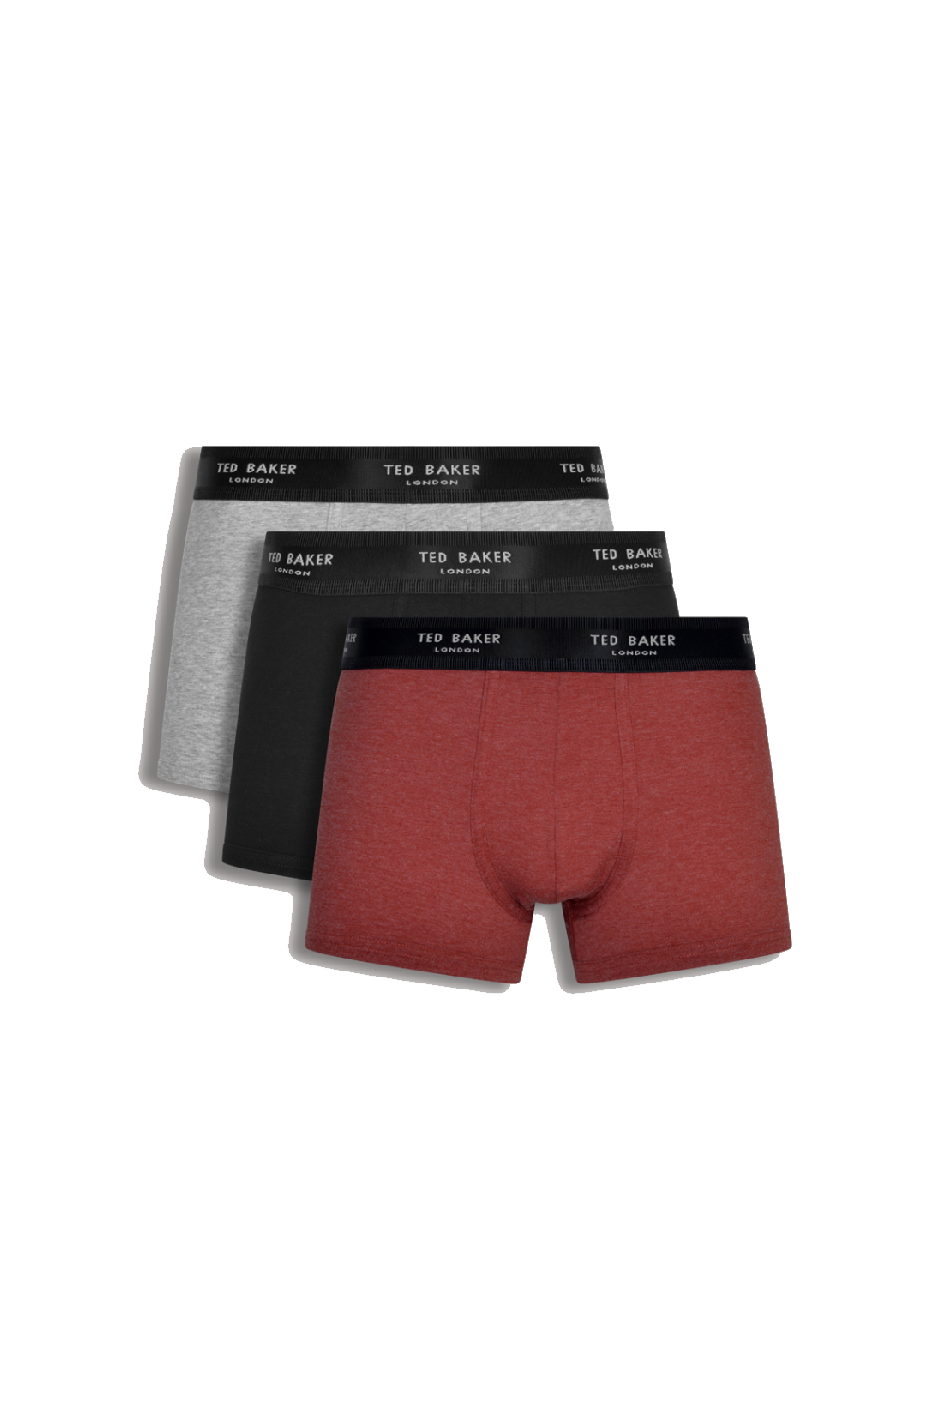 Ted Baker 3 Pack Cotton Fashion Men's Trunk